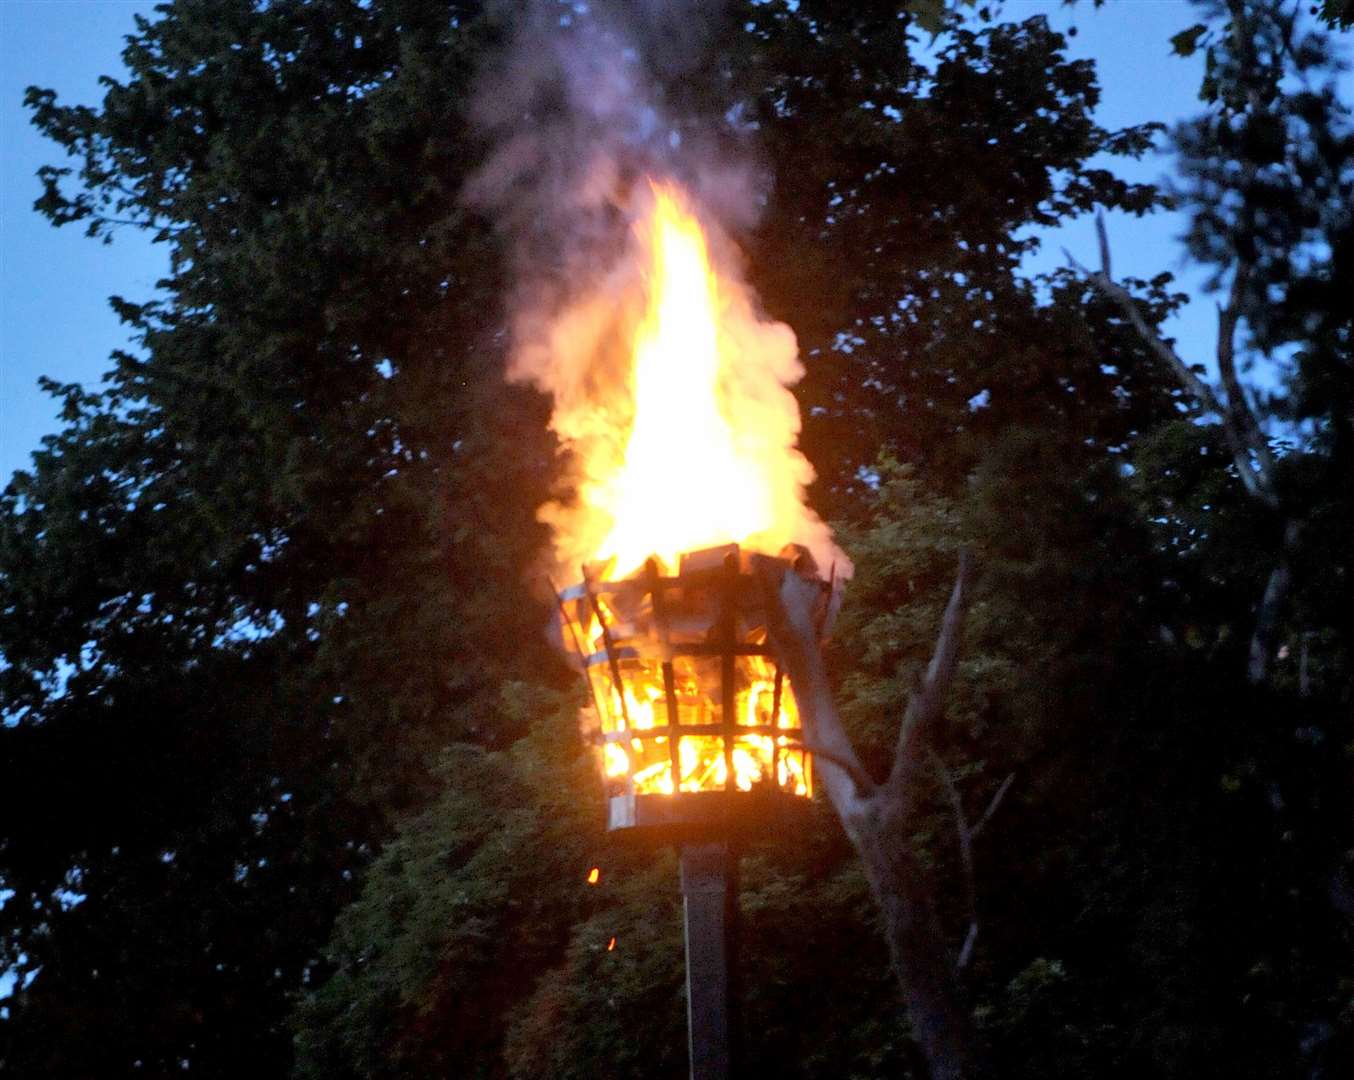 The beacon will be lit on special occasions throughout the year according to the applicants